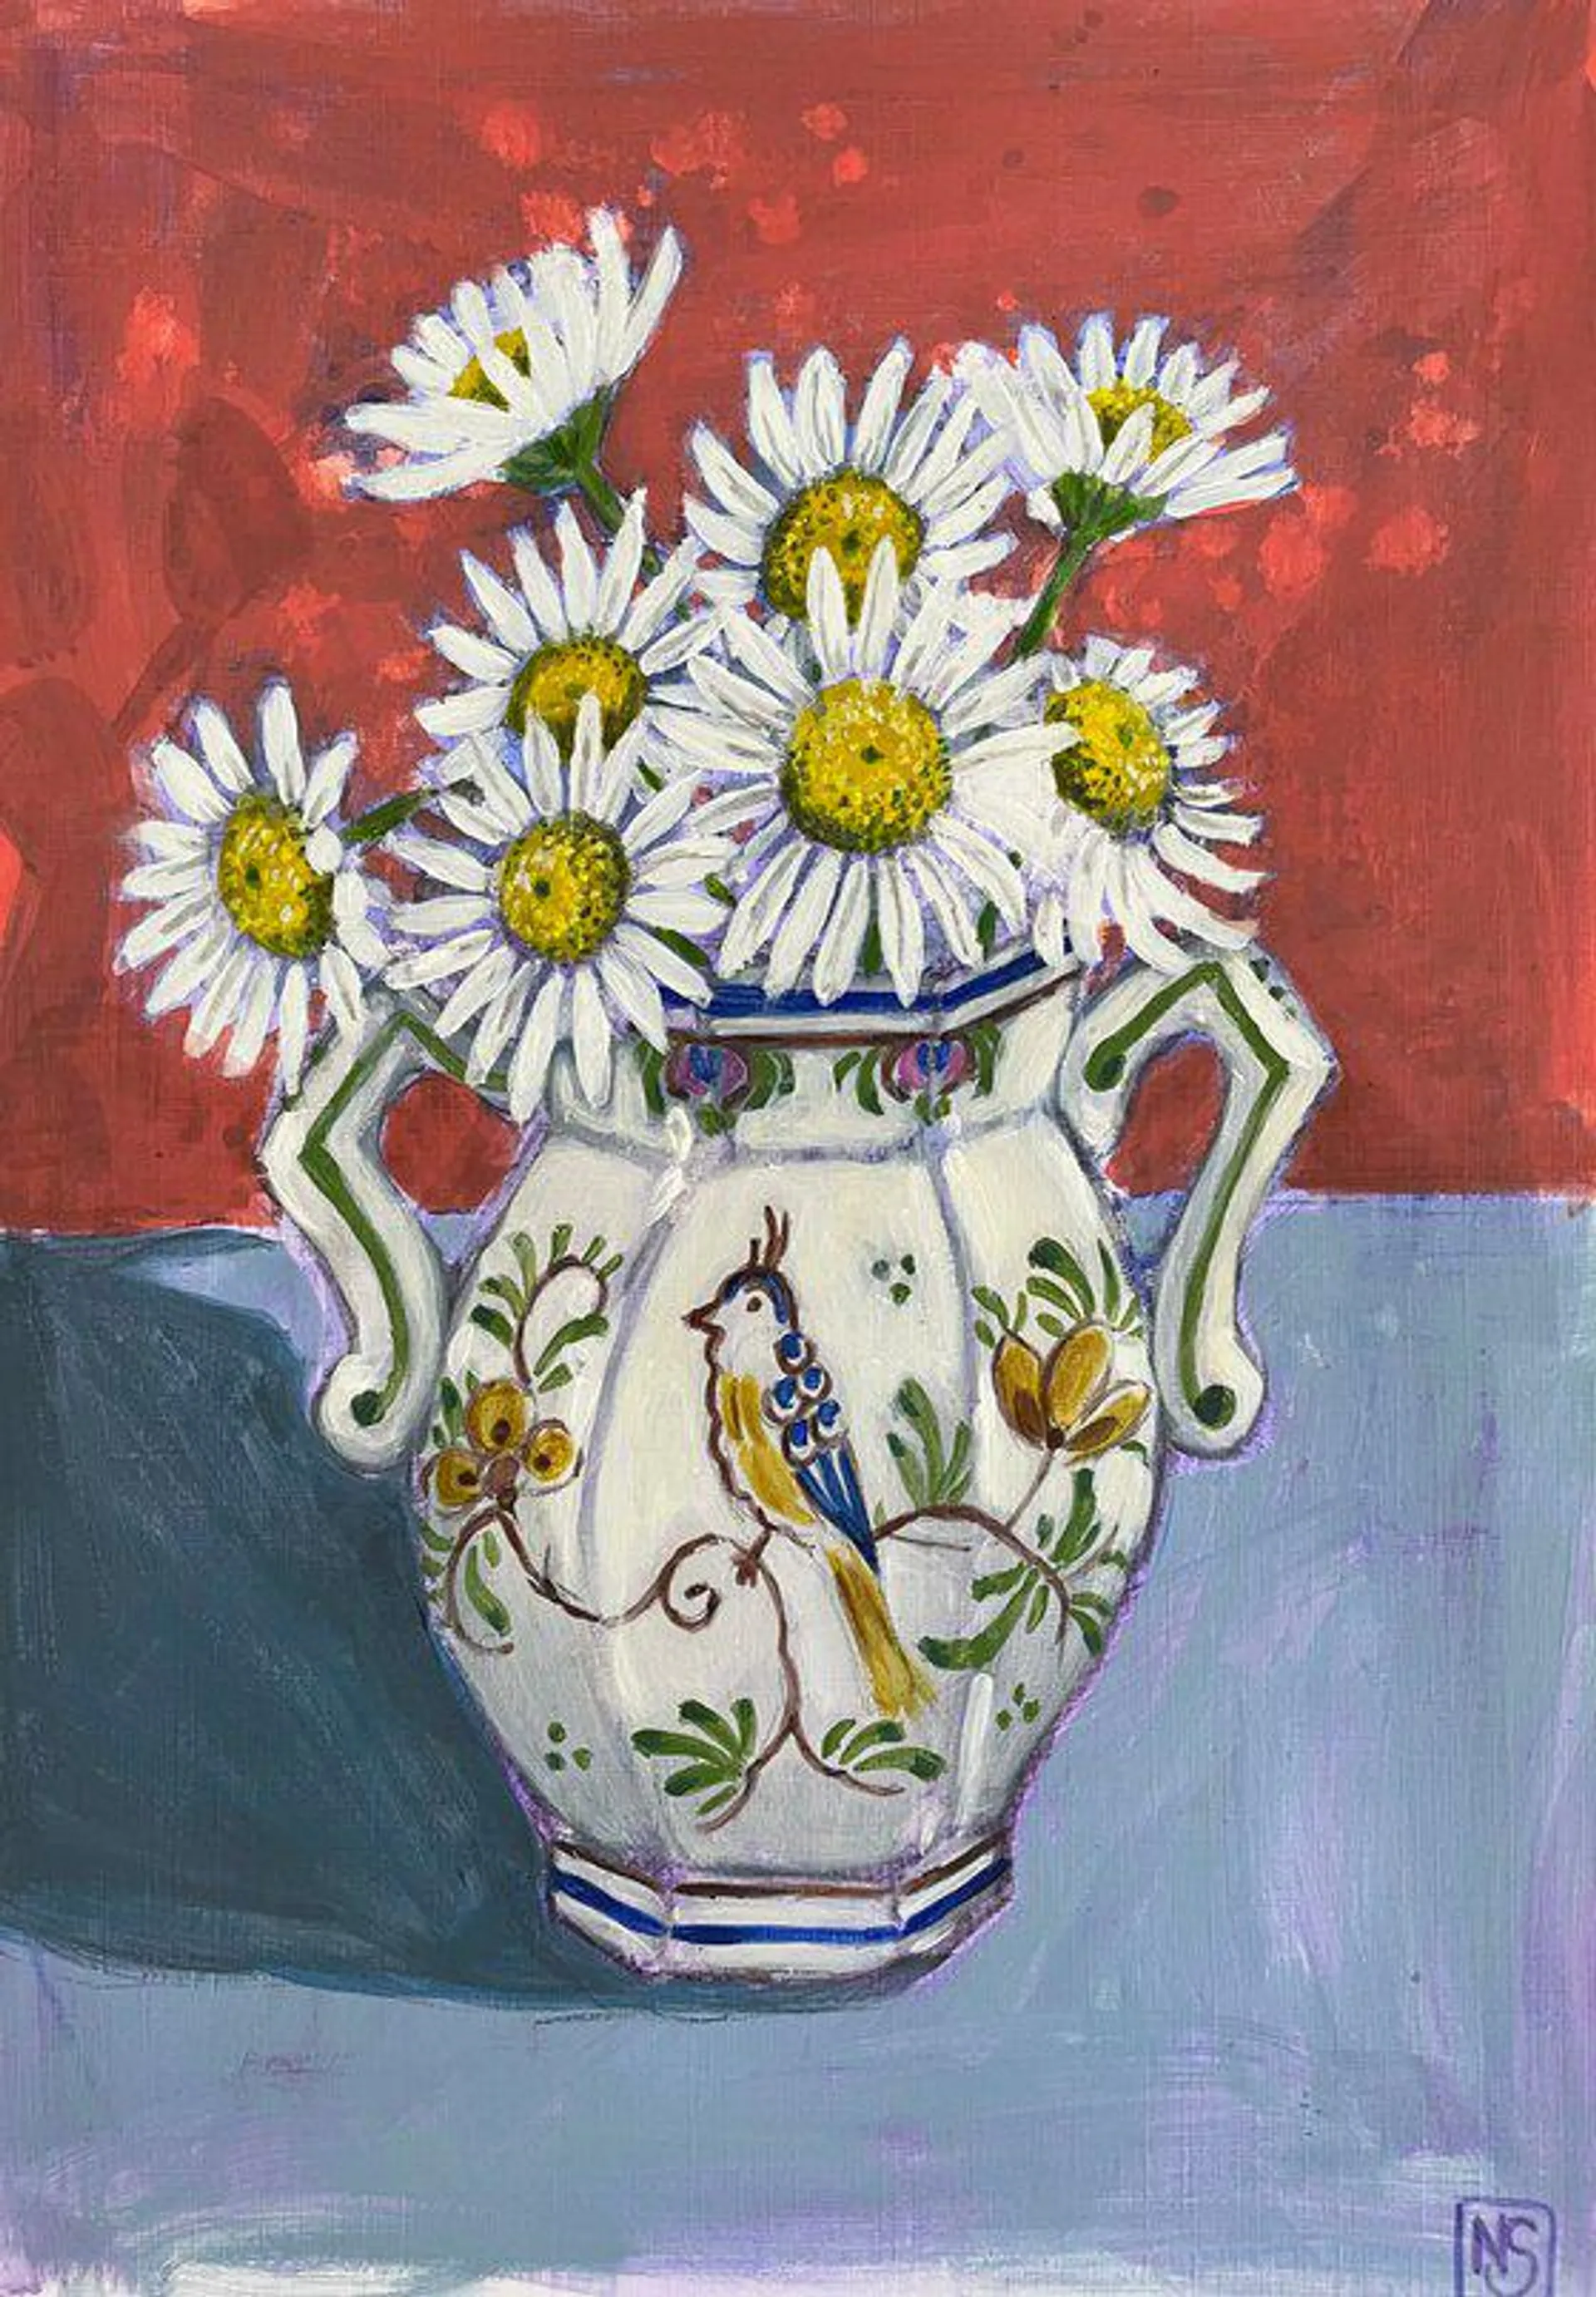 The Delft Jug and the Daisies (2022)